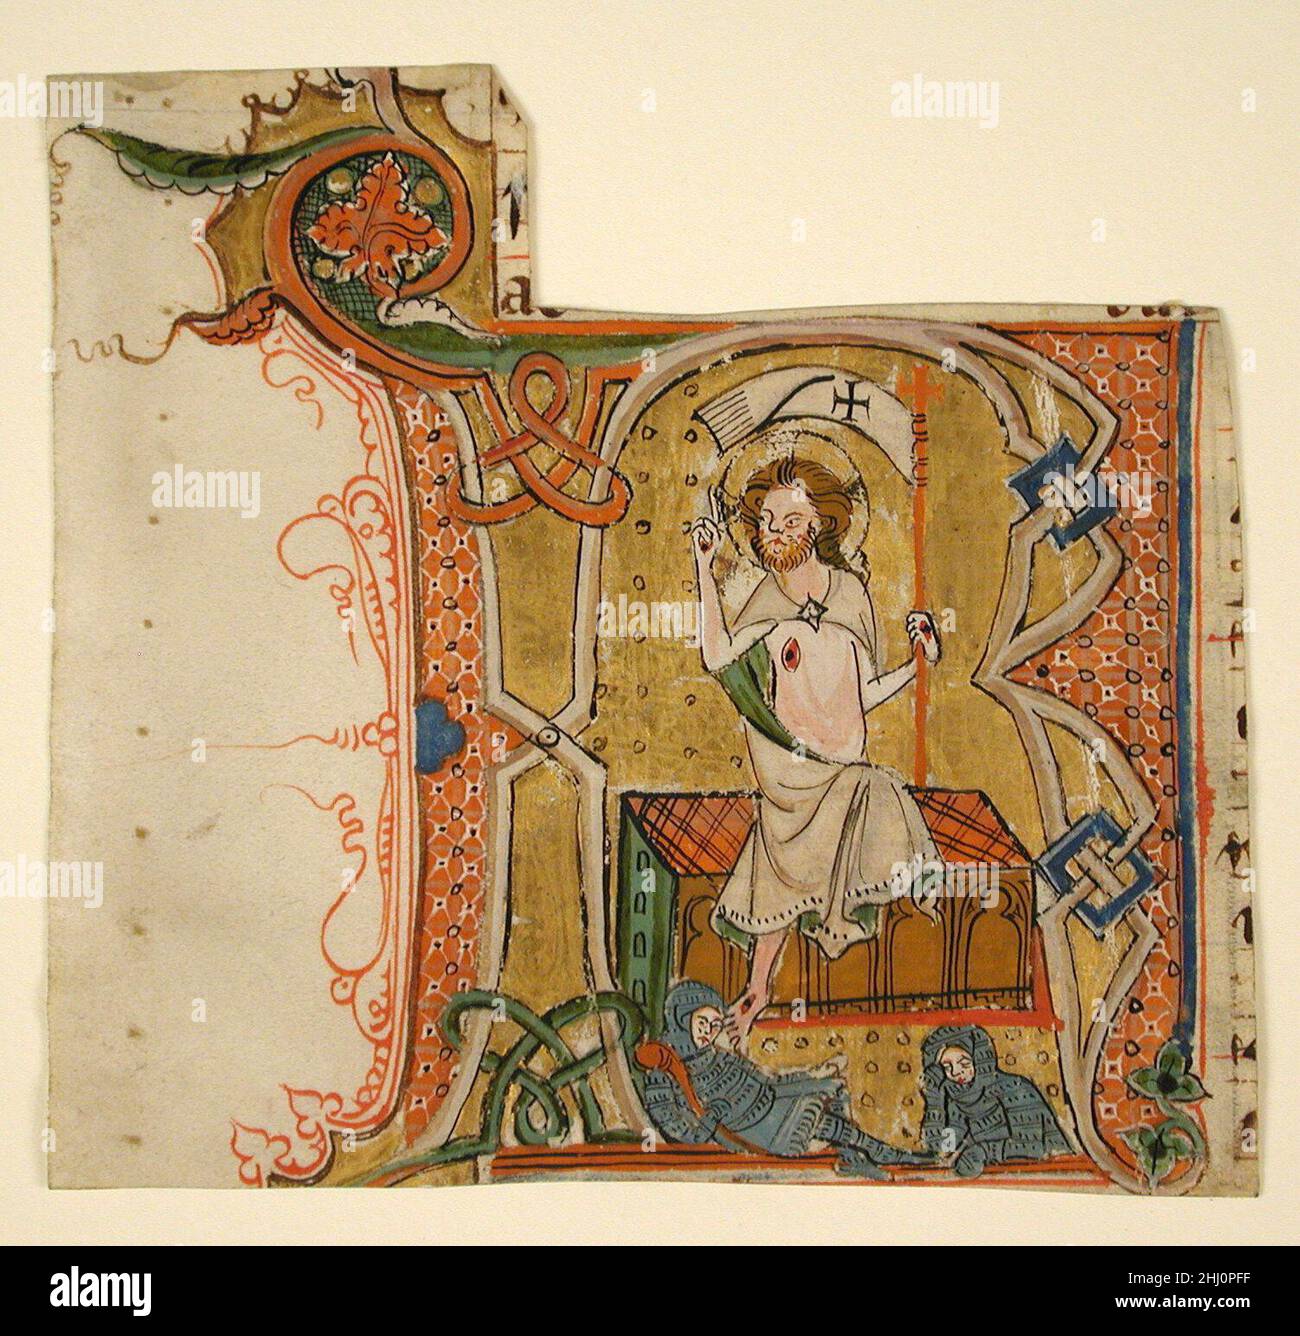 Manuscript Leaf Showing an Illuminated Initial R with The Resurrection late 13th century Rhenish. Manuscript Leaf Showing an Illuminated Initial R with The Resurrection. Rhenish. late 13th century. Parchment, tempera, ink, metal leaf. Manuscripts and Illuminations Stock Photo